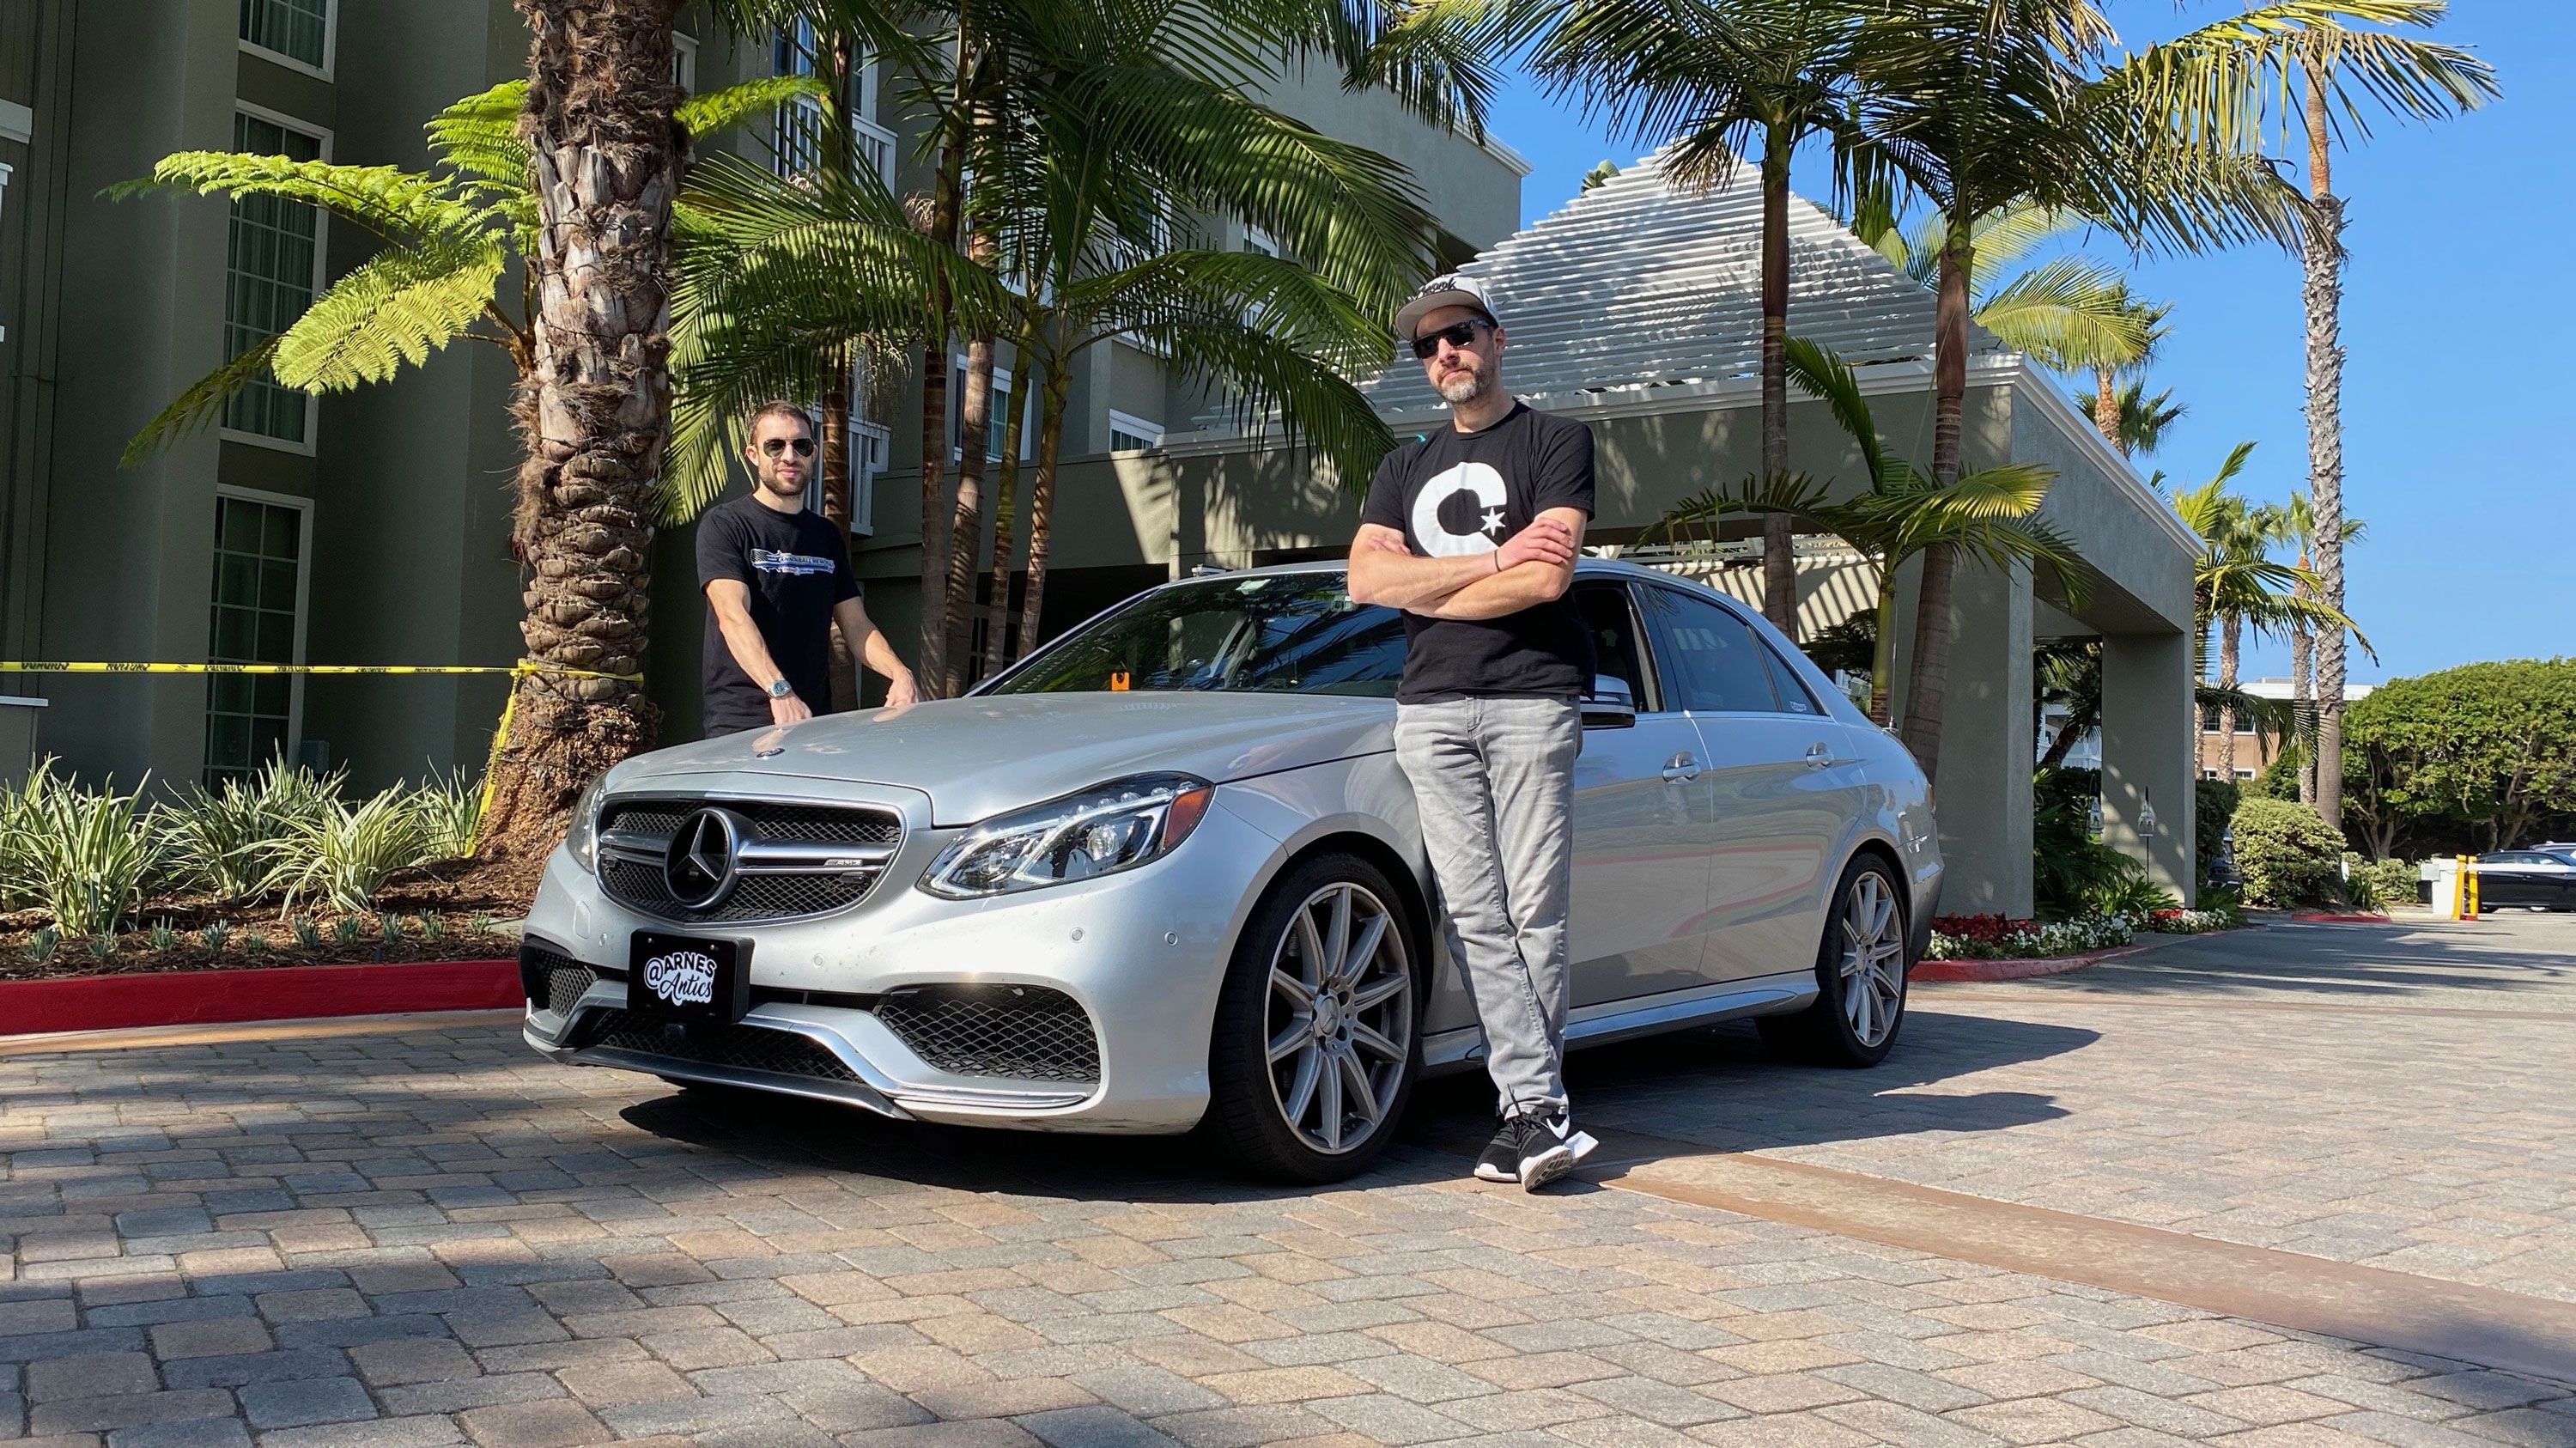 Cannonball Run' record broken with 27 hour, 25 minute cross-country drive